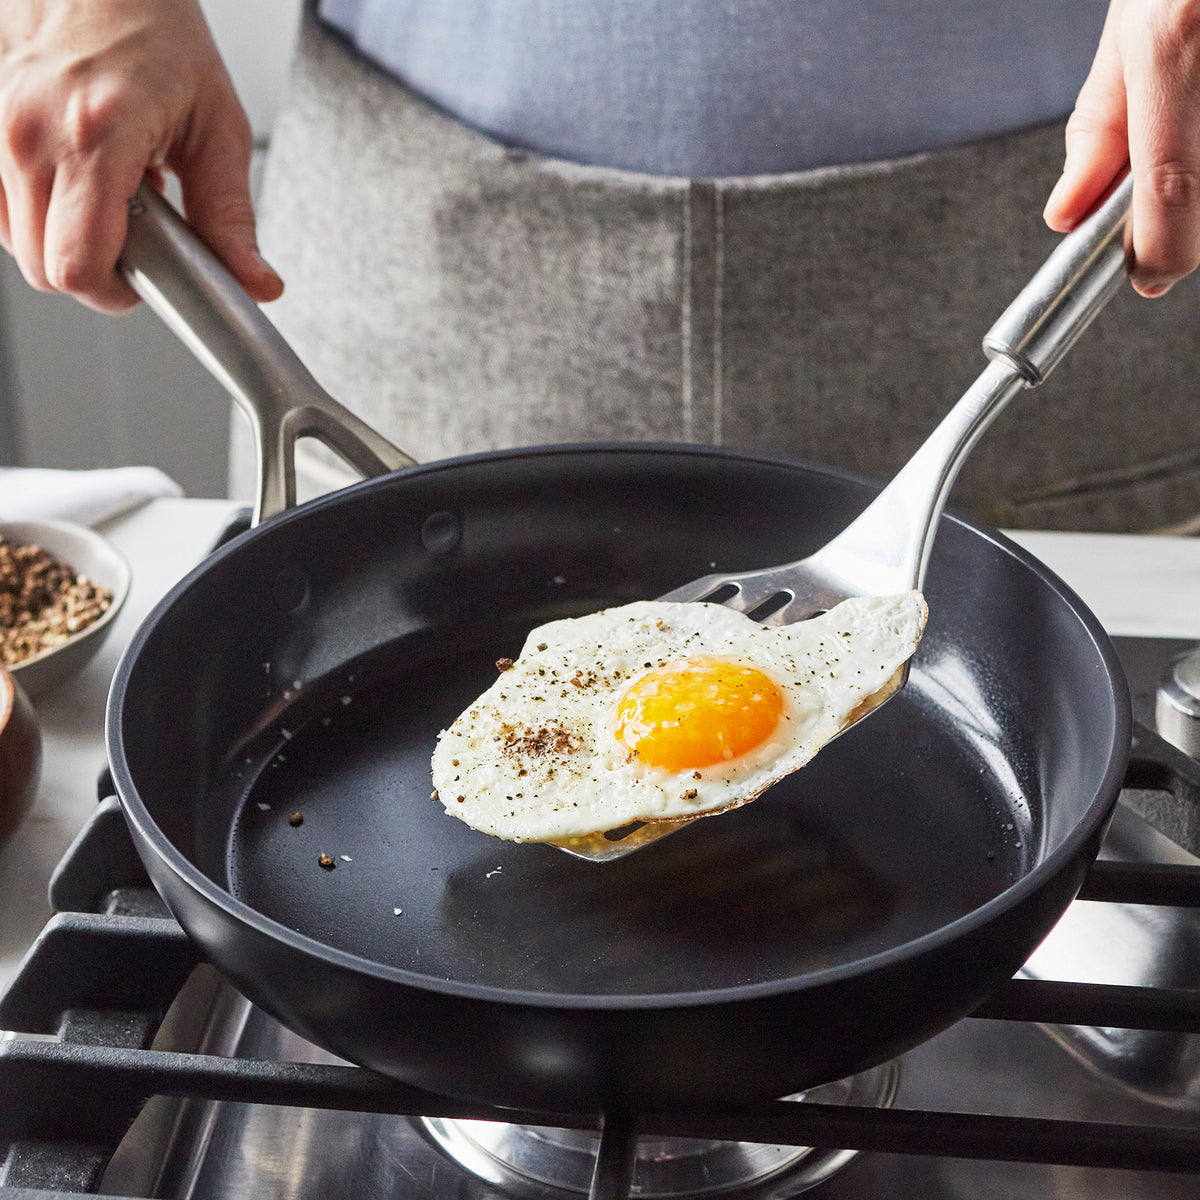 Frying Pans Nonstick 9.5 Inch, Non Stick Skillet Pan with Stainless Steel  Handle, Pancake Pan, Egg Pan, Non Toxic pans for Cooking, Dishwasher Safe 